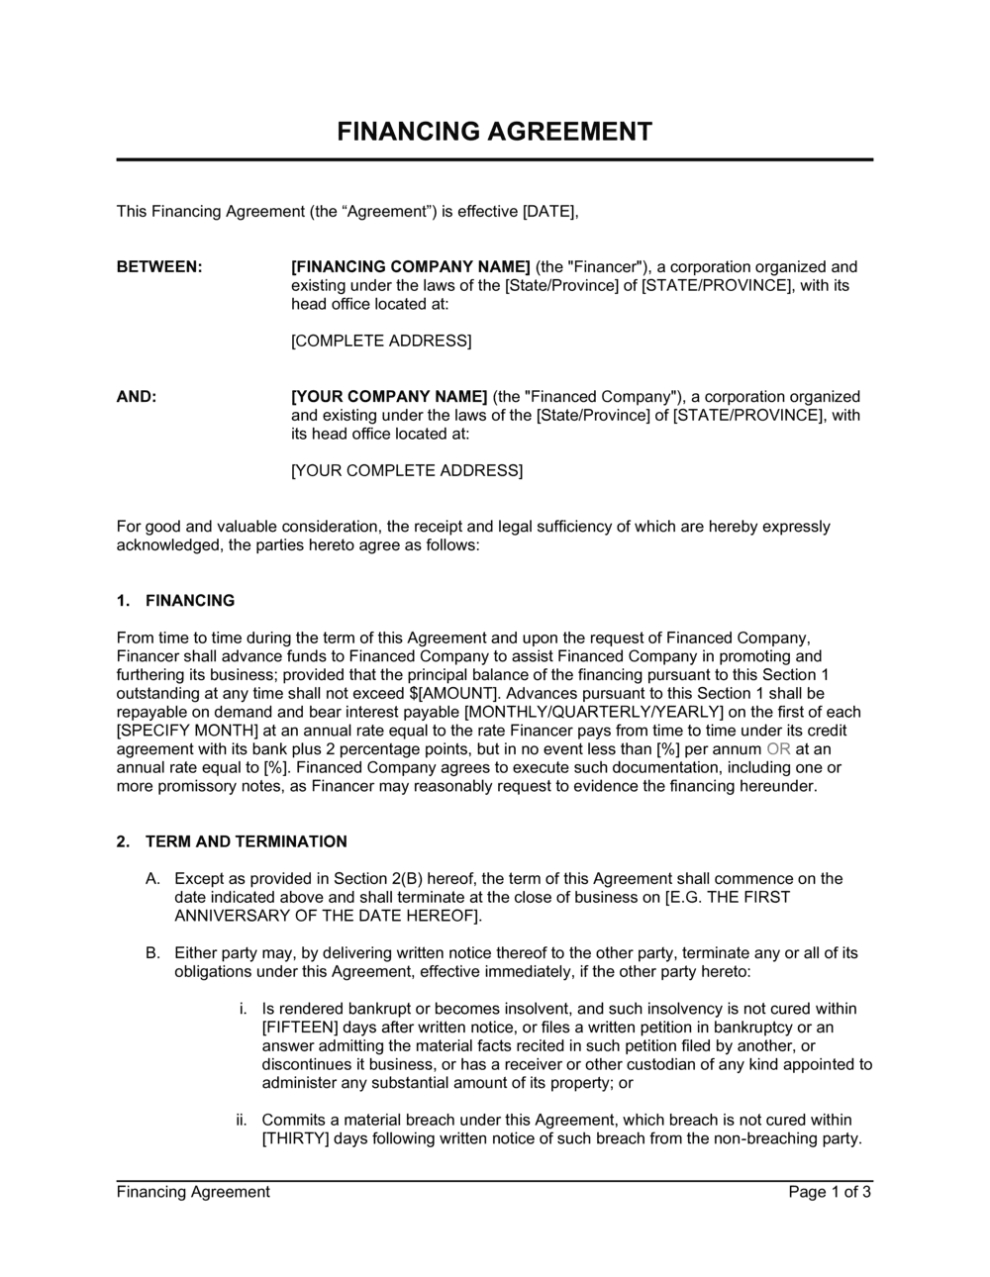 Financing Agreement Template | By Business In A Box™ Within Trade Finance Loan Agreement Template